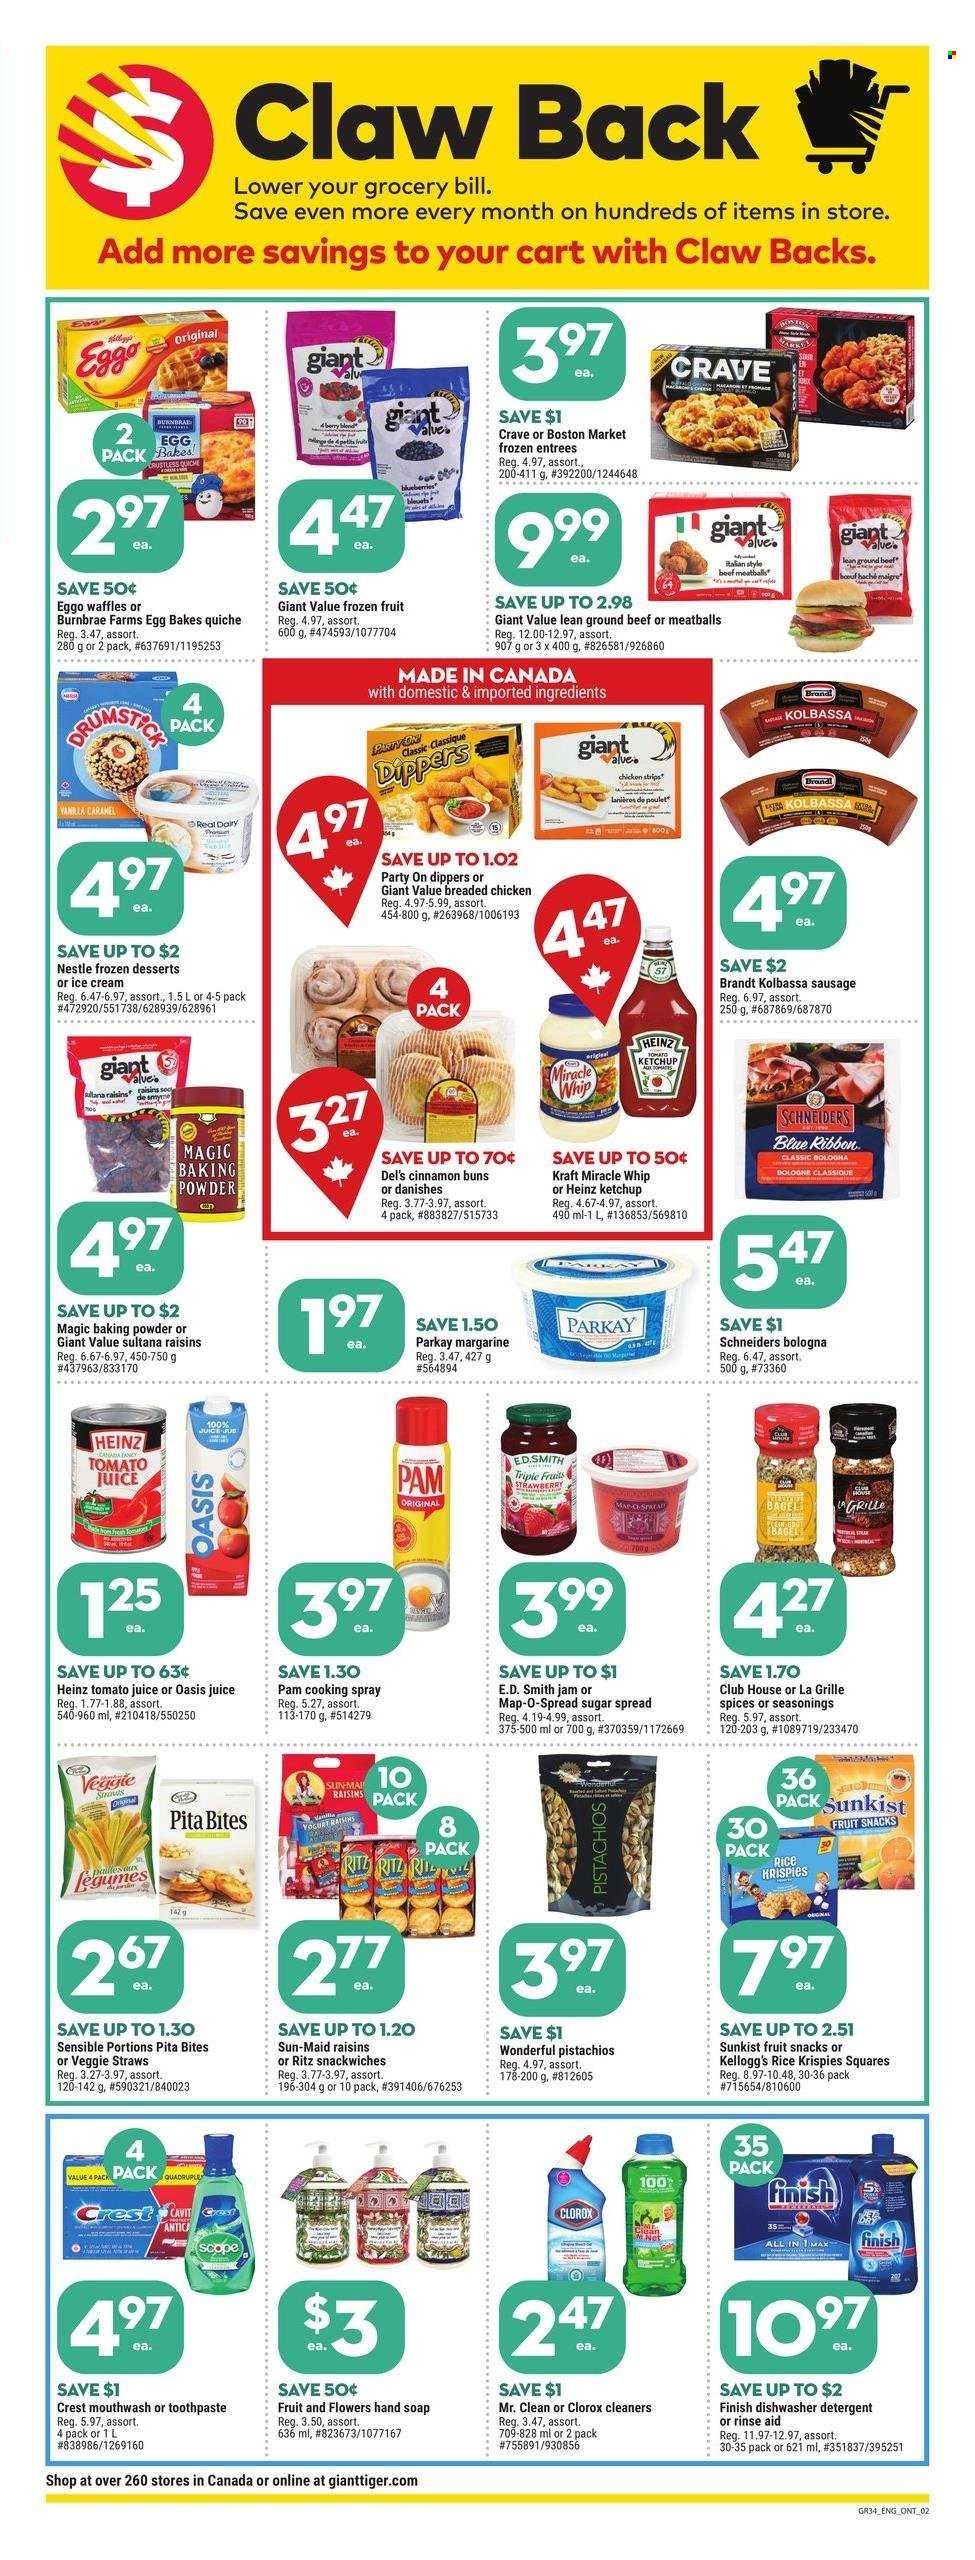 thumbnail - Giant Tiger Flyer - March 22, 2023 - March 28, 2023 - Sales products - pita, buns, waffles, meatballs, fried chicken, Kraft®, bologna sausage, sausage, yoghurt, margarine, Miracle Whip, chicken strips, quiche, Kellogg's, fruit snack, RITZ, veggie straws, sugar, Rice Krispies, cinnamon, caramel, cooking spray, fruit jam, pistachios, tomato juice, juice, chicken, beef meat, ground beef, Clorox, hand soap, soap, toothpaste, mouthwash, Crest, scope, cart, flowers, detergent, Nestlé, Heinz, ketchup. Page 2.